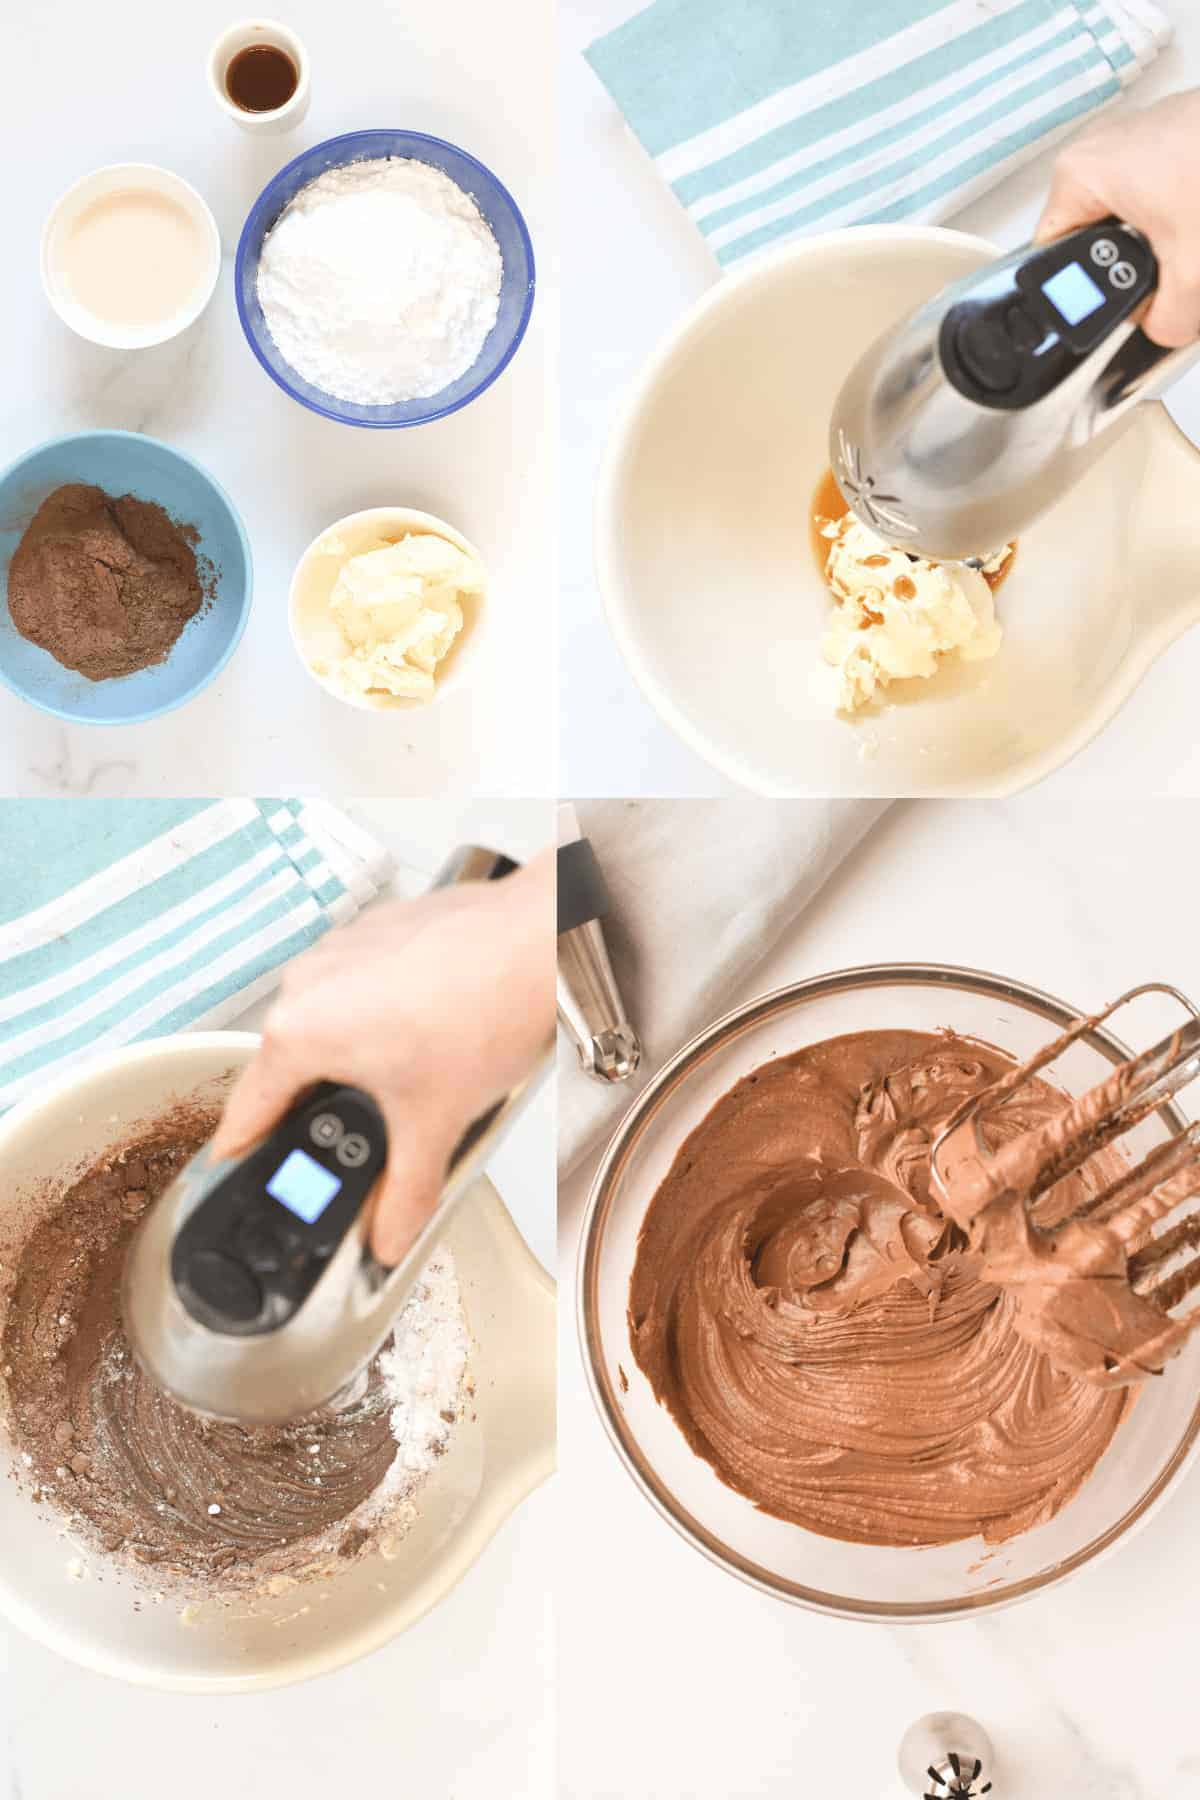 How to make Vegan Chocolate Buttercream Frosting